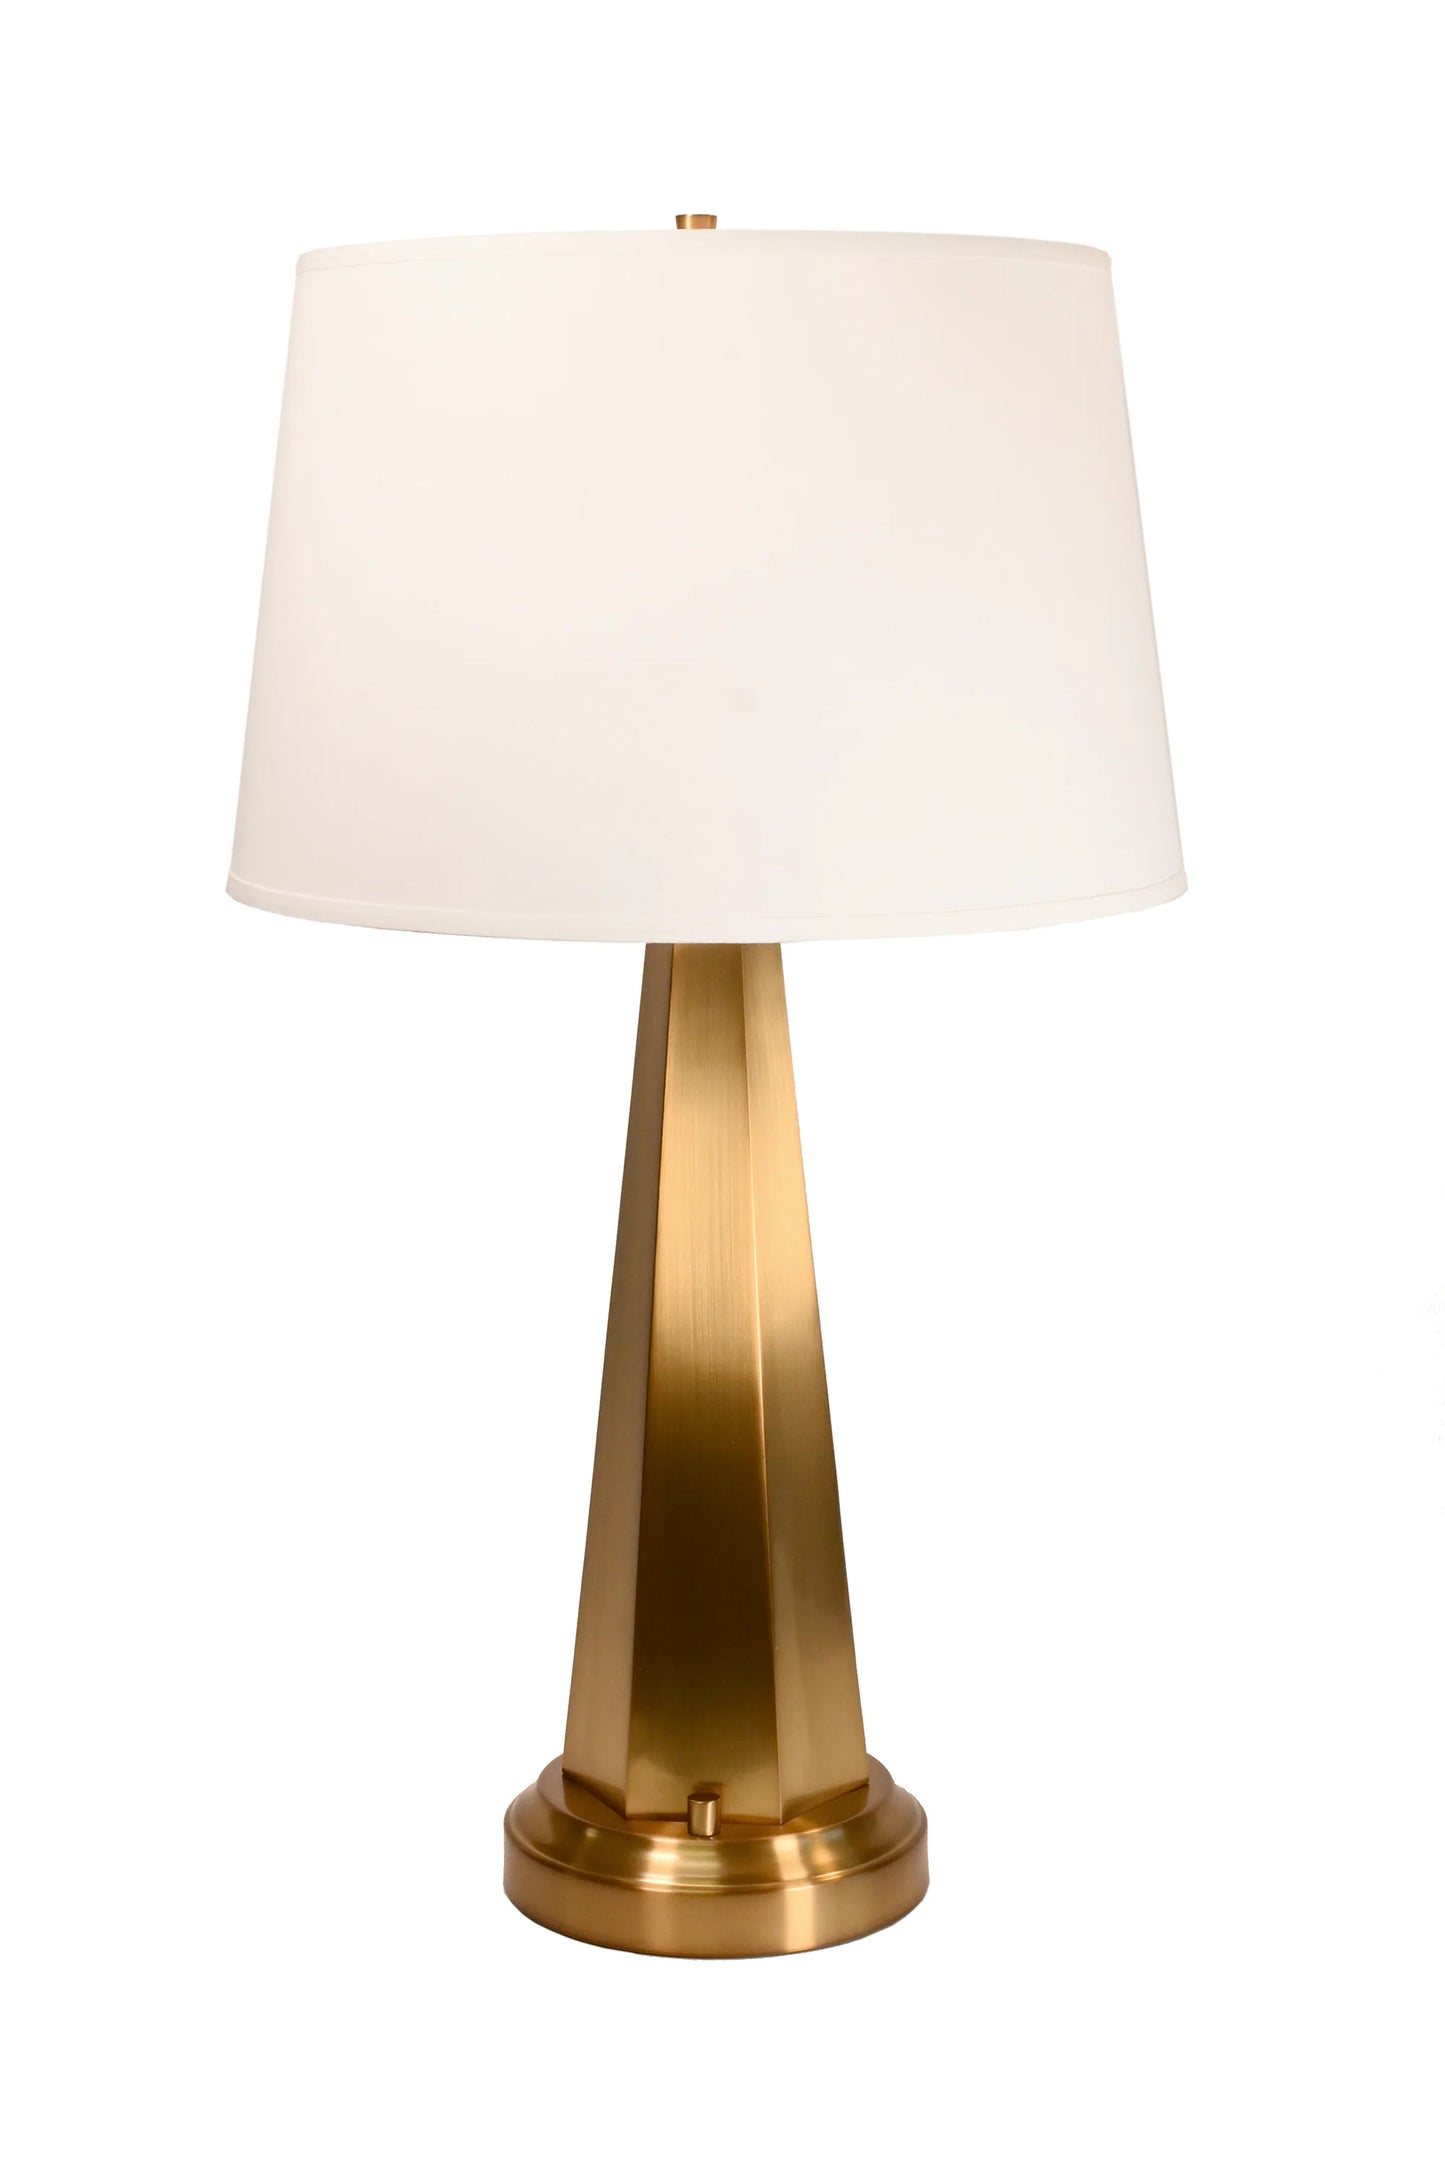 Antique Brass Battery-Powered Table Lamp